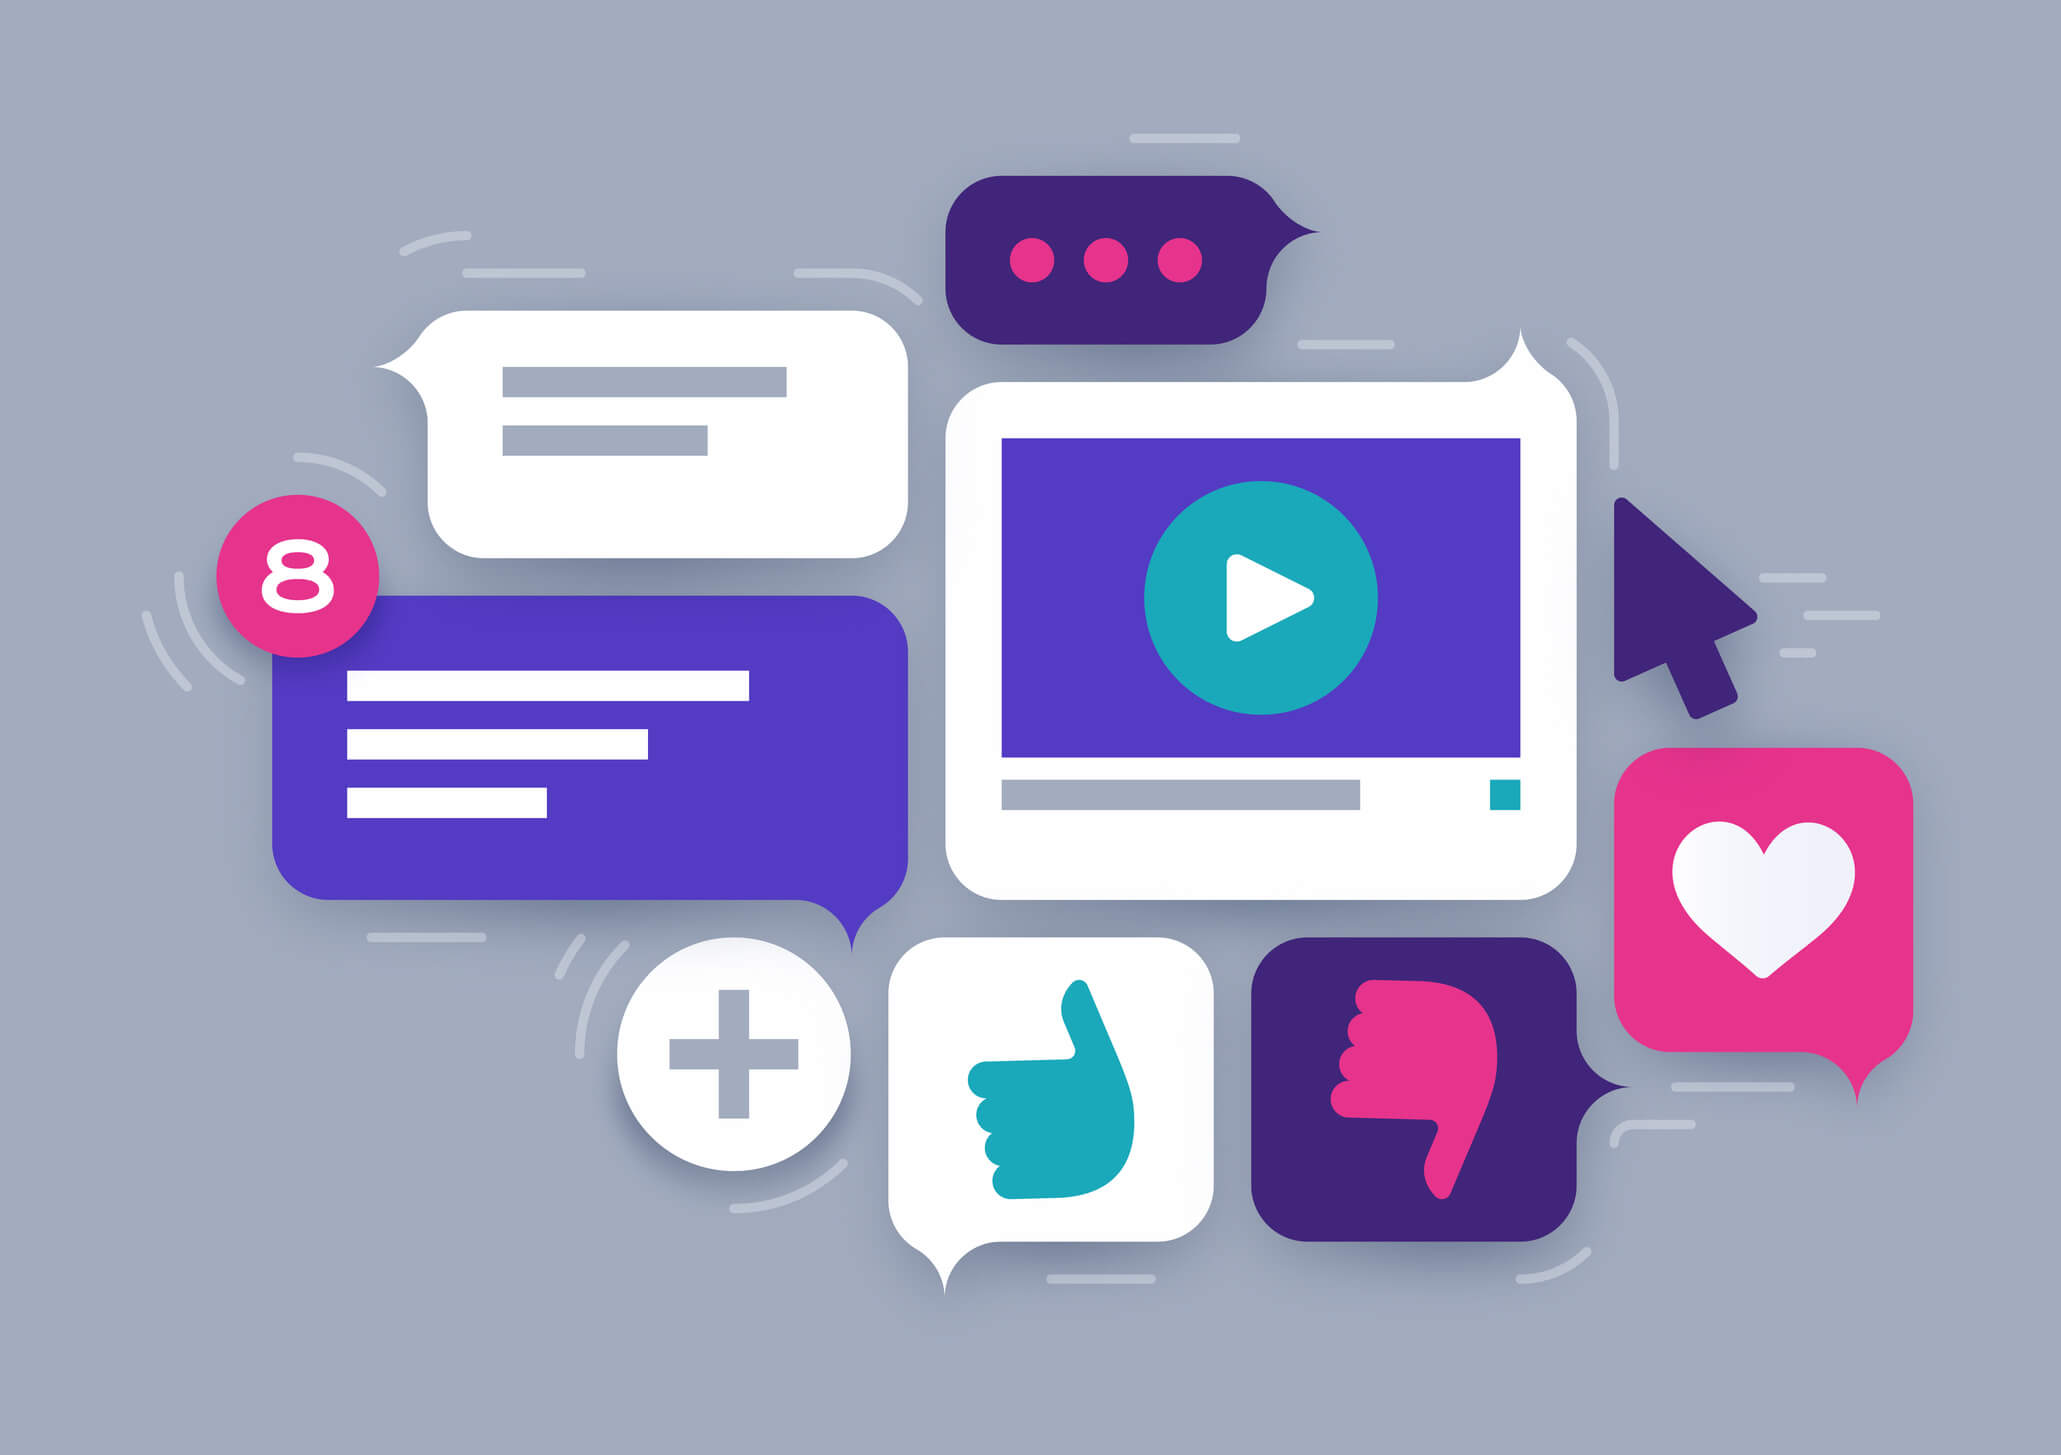 Grey graphic with colorful pink, turquoise, white, and purple icons representing social media engagement buttons and text boxes